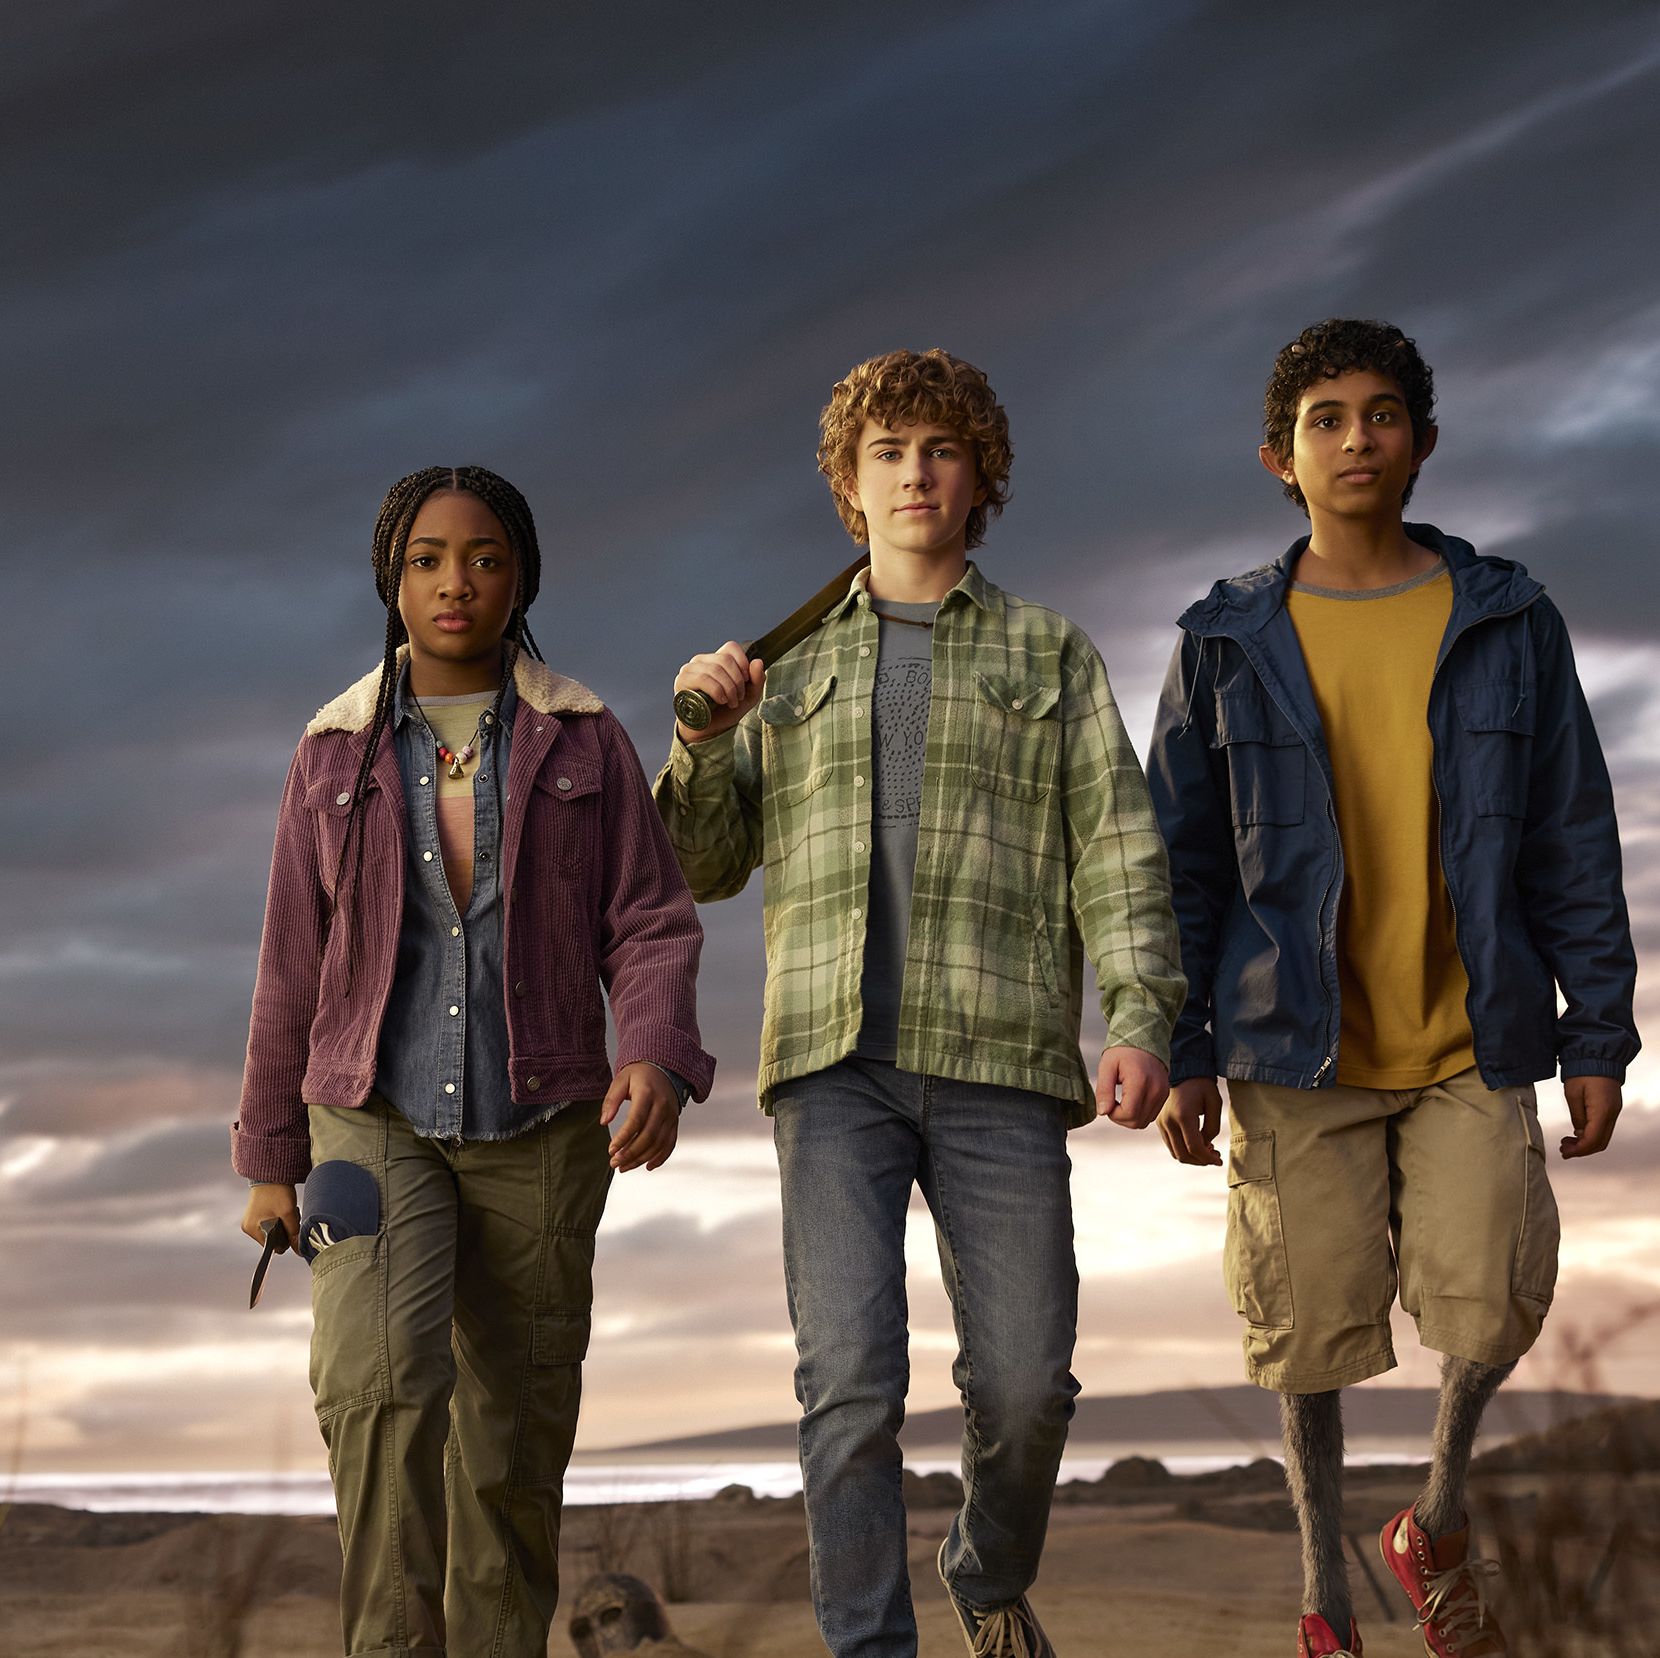 'Percy Jackson and the Olympians' Renewed for Season 2, Will Follow 'Sea of Monsters'